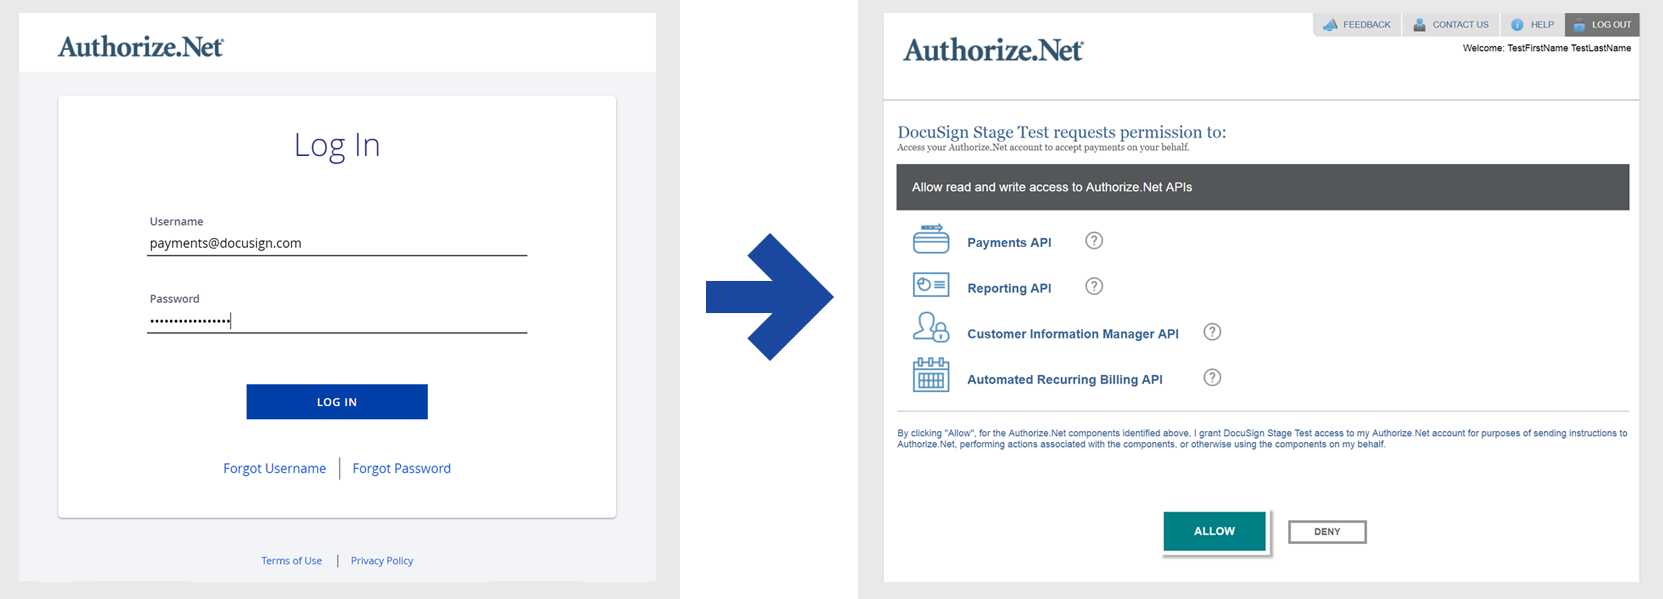 Connect to your Authorize.Net account